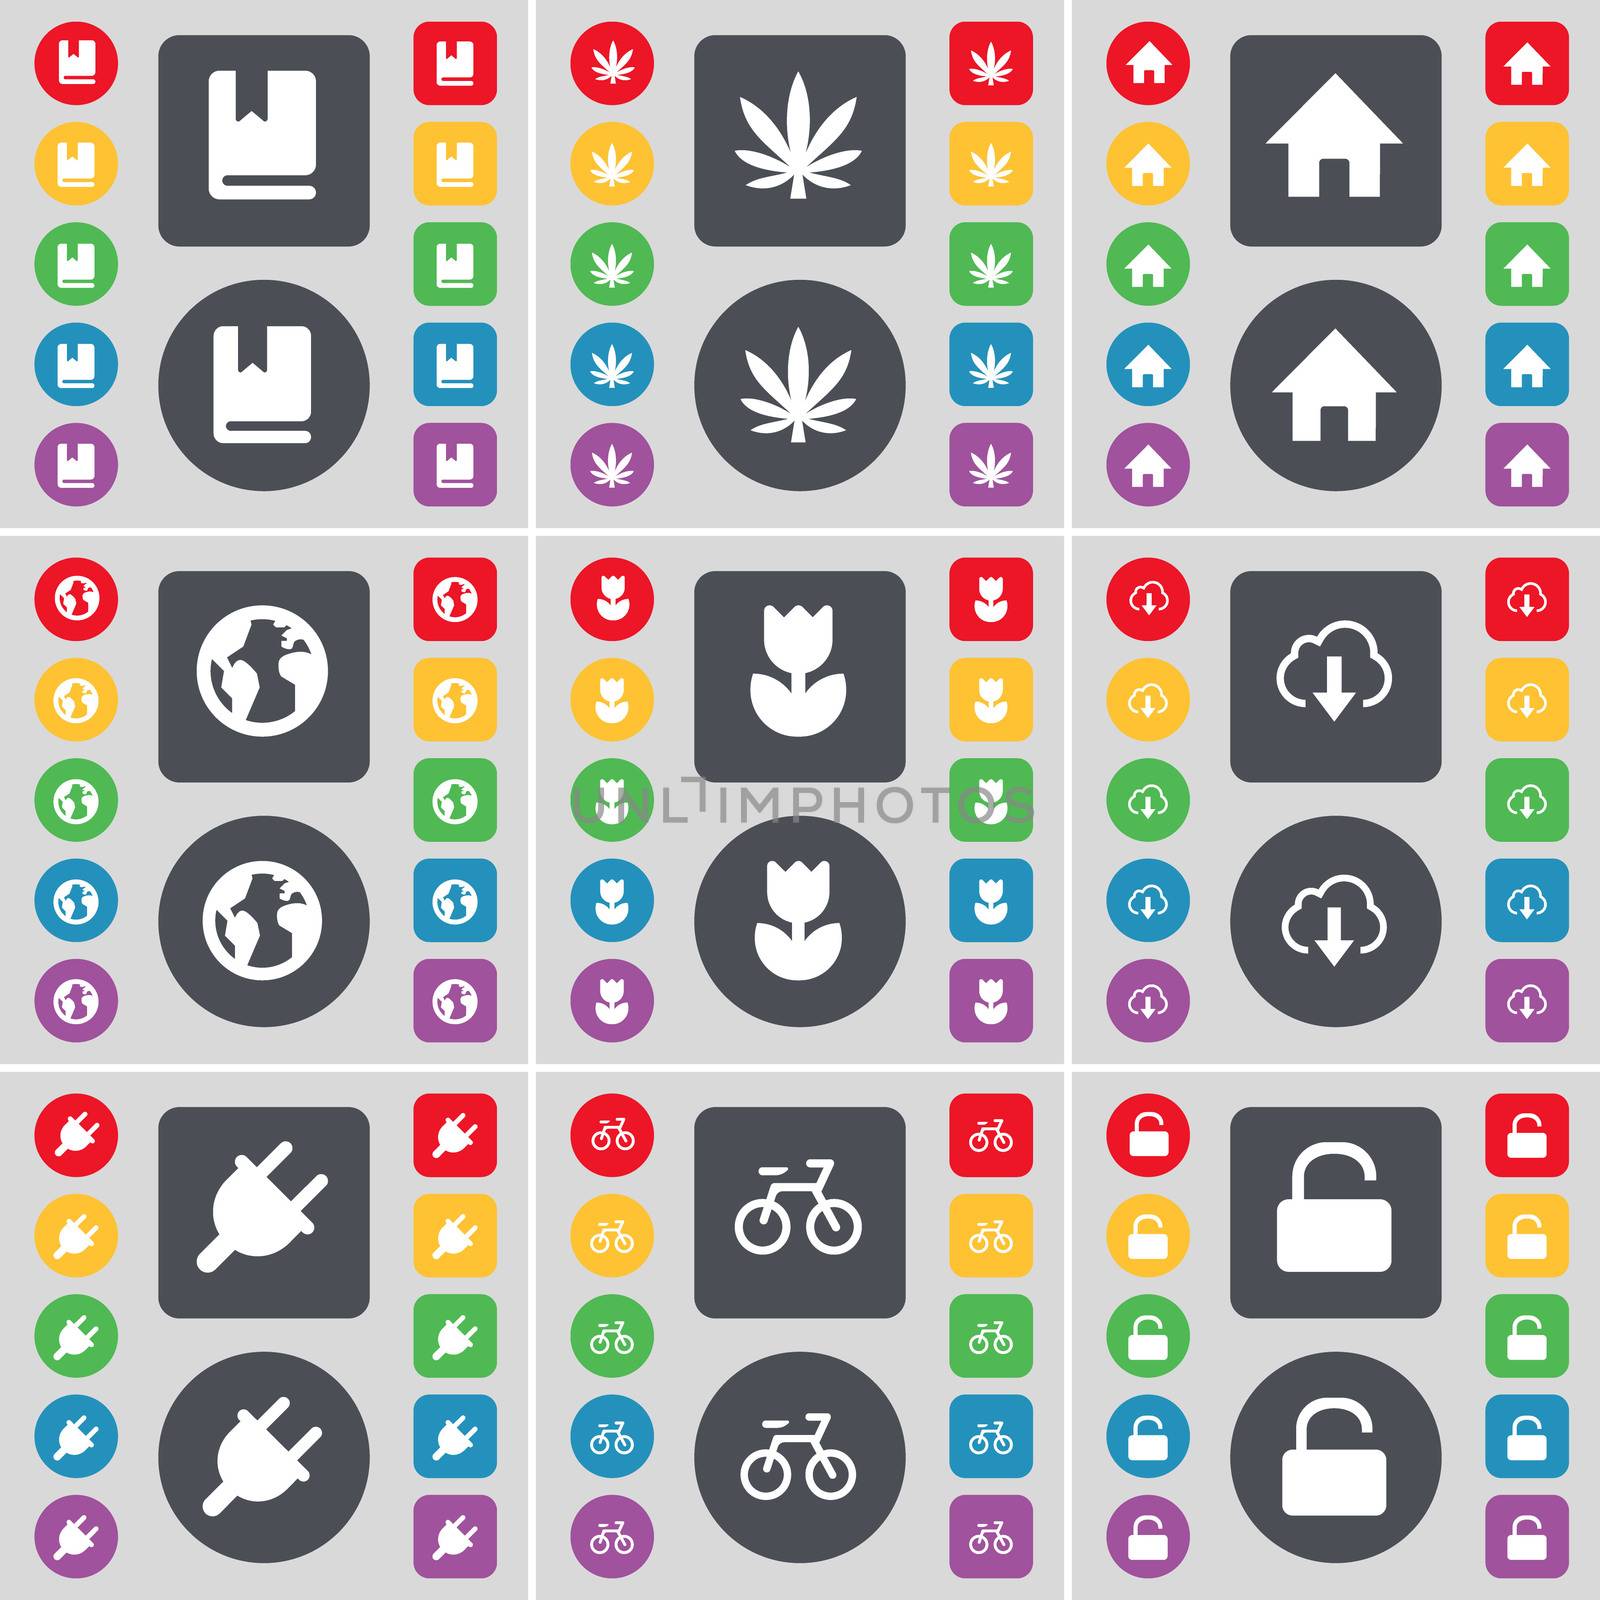 Dictionary, Marijuana, House, Earth, Folder, Cloud, Socket, Bicycle, Lock icon symbol. A large set of flat, colored buttons for your design. illustration